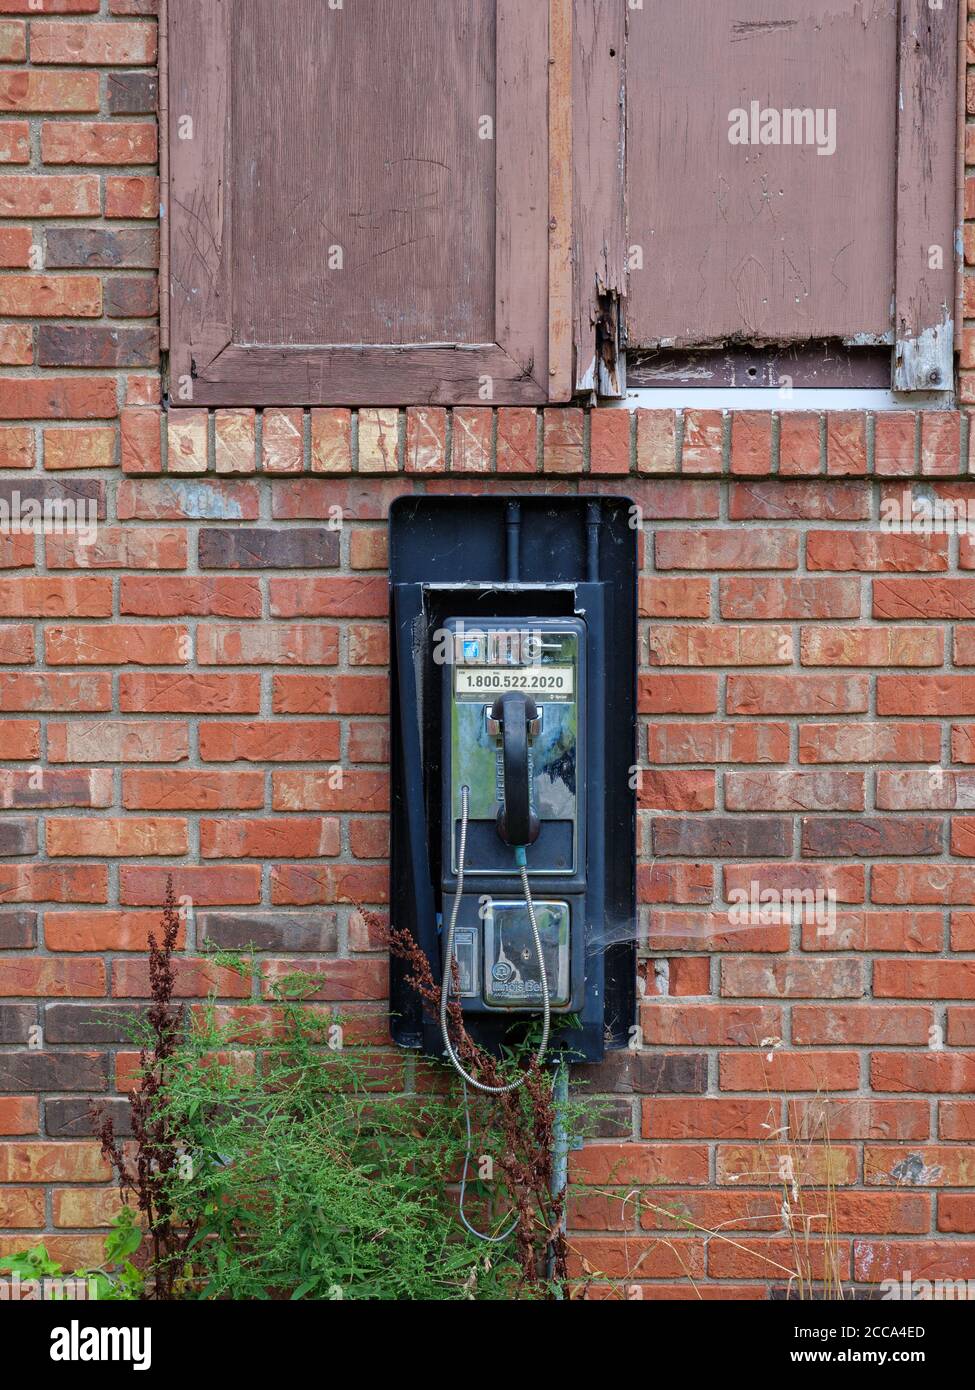 Pay telephone mounted on exterior brick wall. Stock Photo